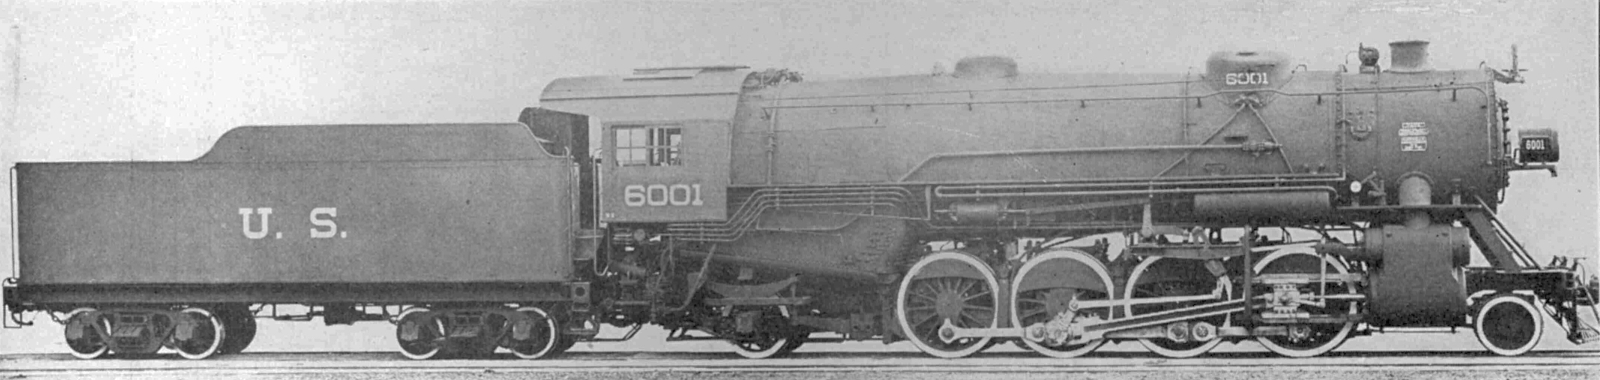 No. 6001 on a works photo